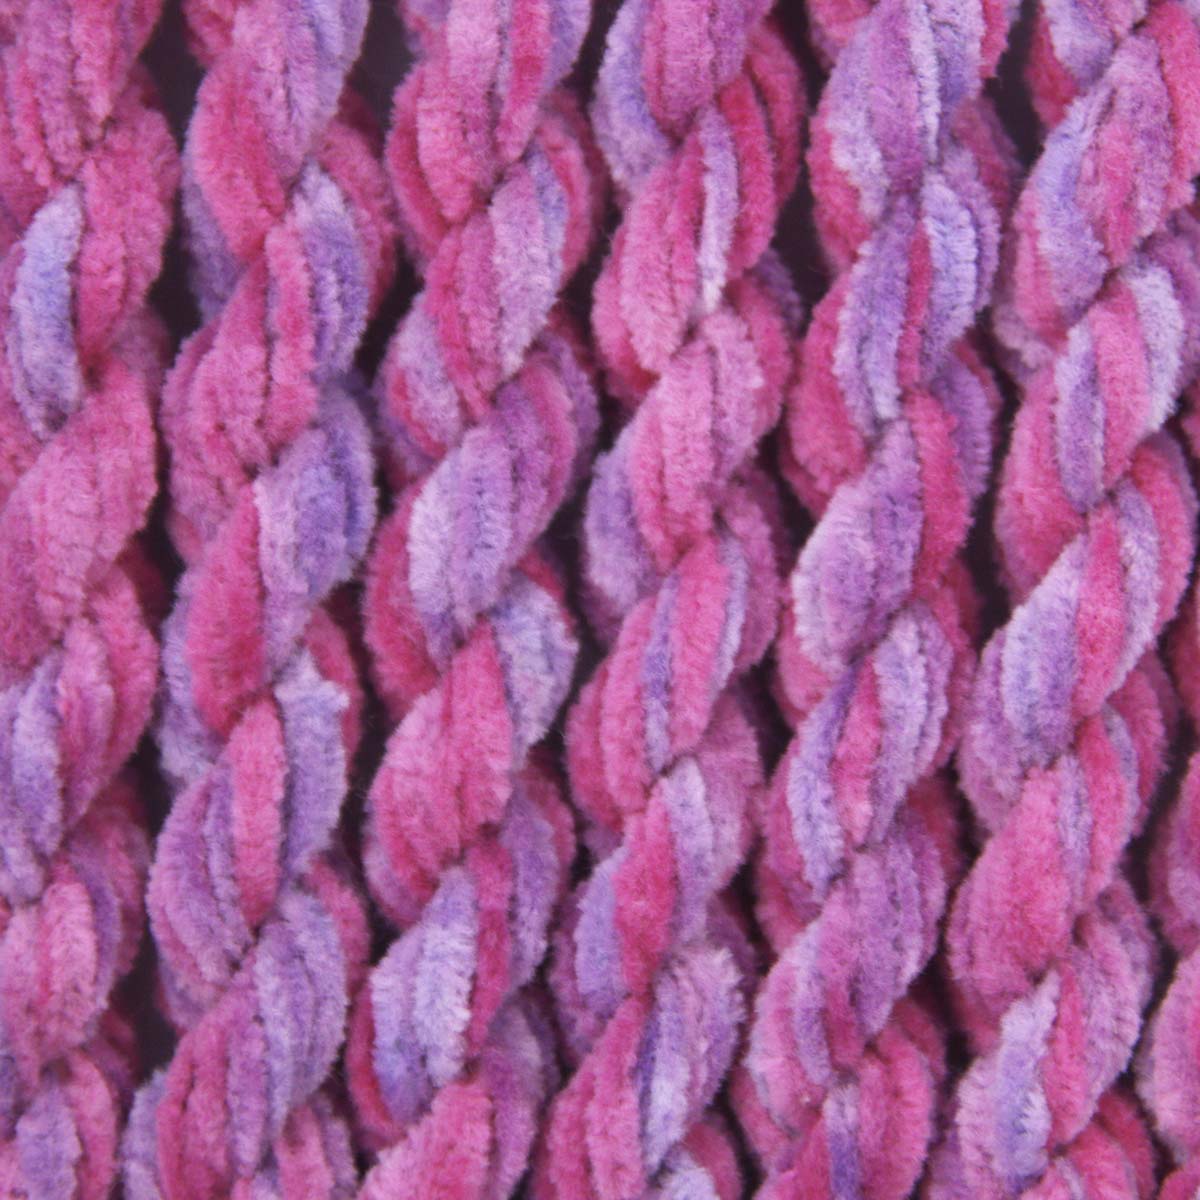 www.colourstreams.com.au Colour Streams Hand Dyed Chenille Threads Slow Stitch Embroidery Textile Arts Fibre DL35 Mardigras Purples Pinks